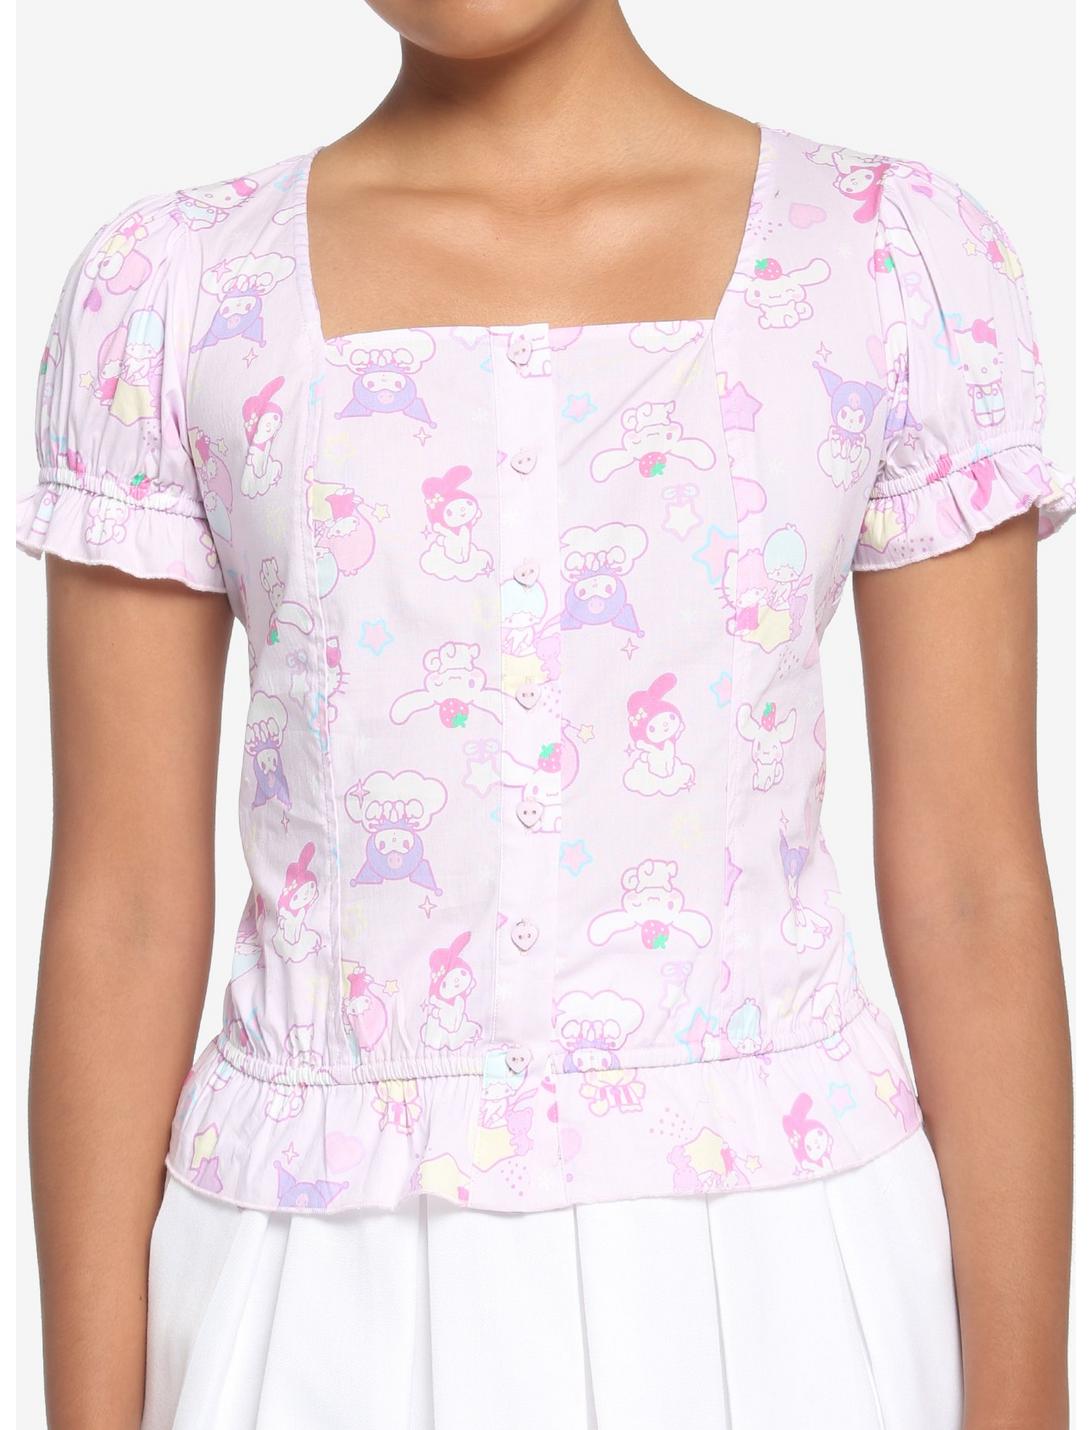 Hello Kitty And Friends Pastel Ruffle Girls Button-Up Top, MULTI, hi-res